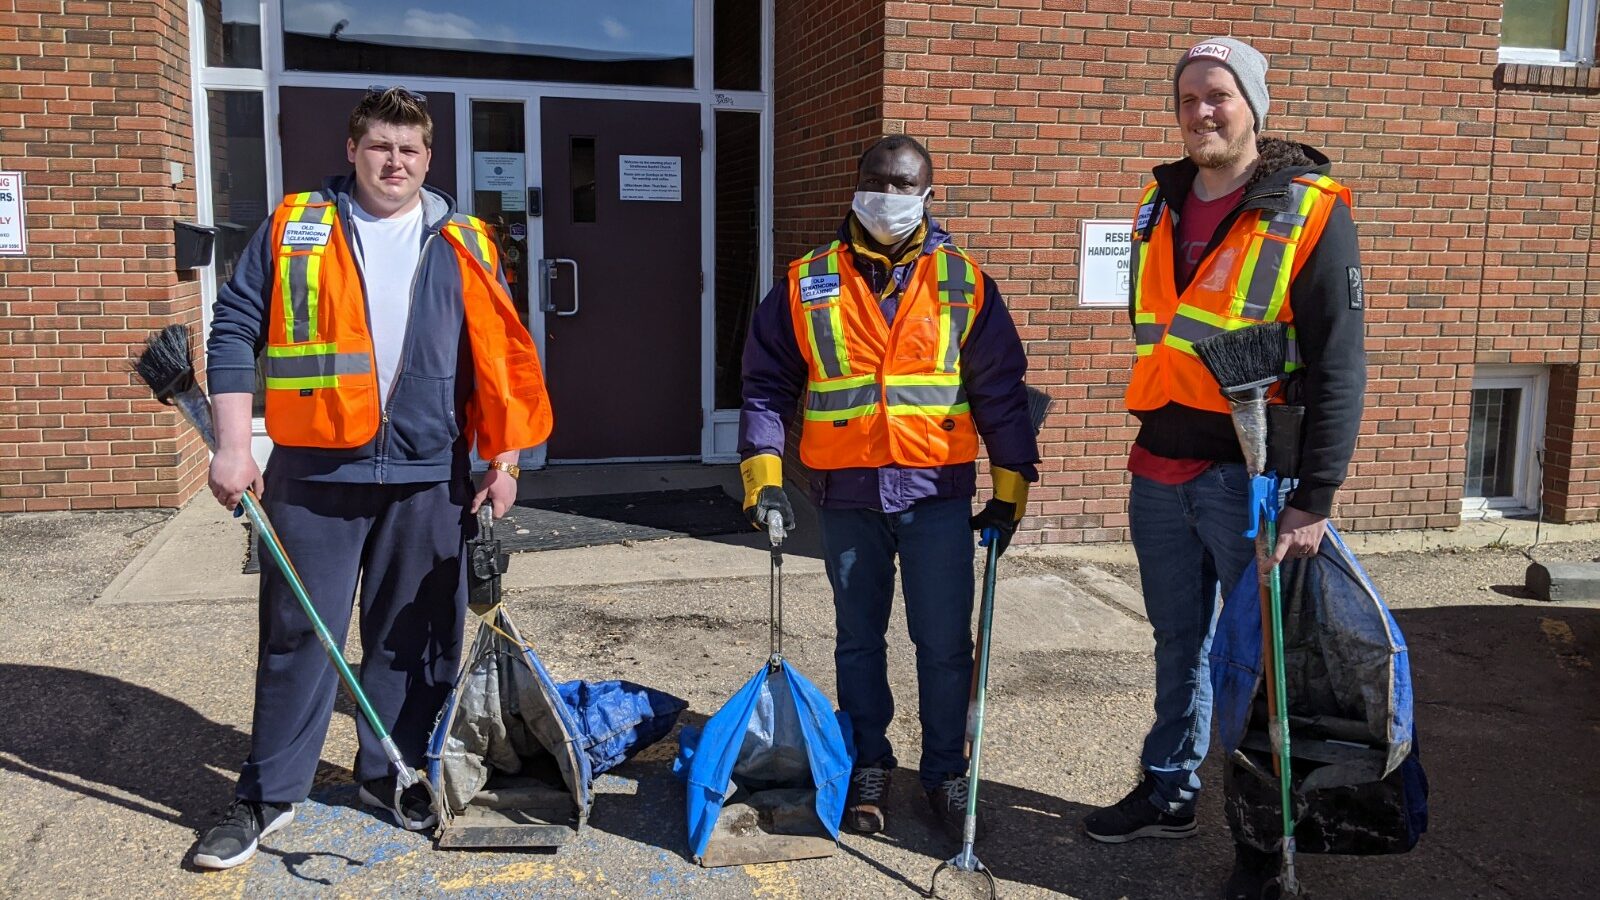 Three members of the Old Strathcona Clean Team pose for a photo wearing orange vests, holding cleaning grabbers and blue bags